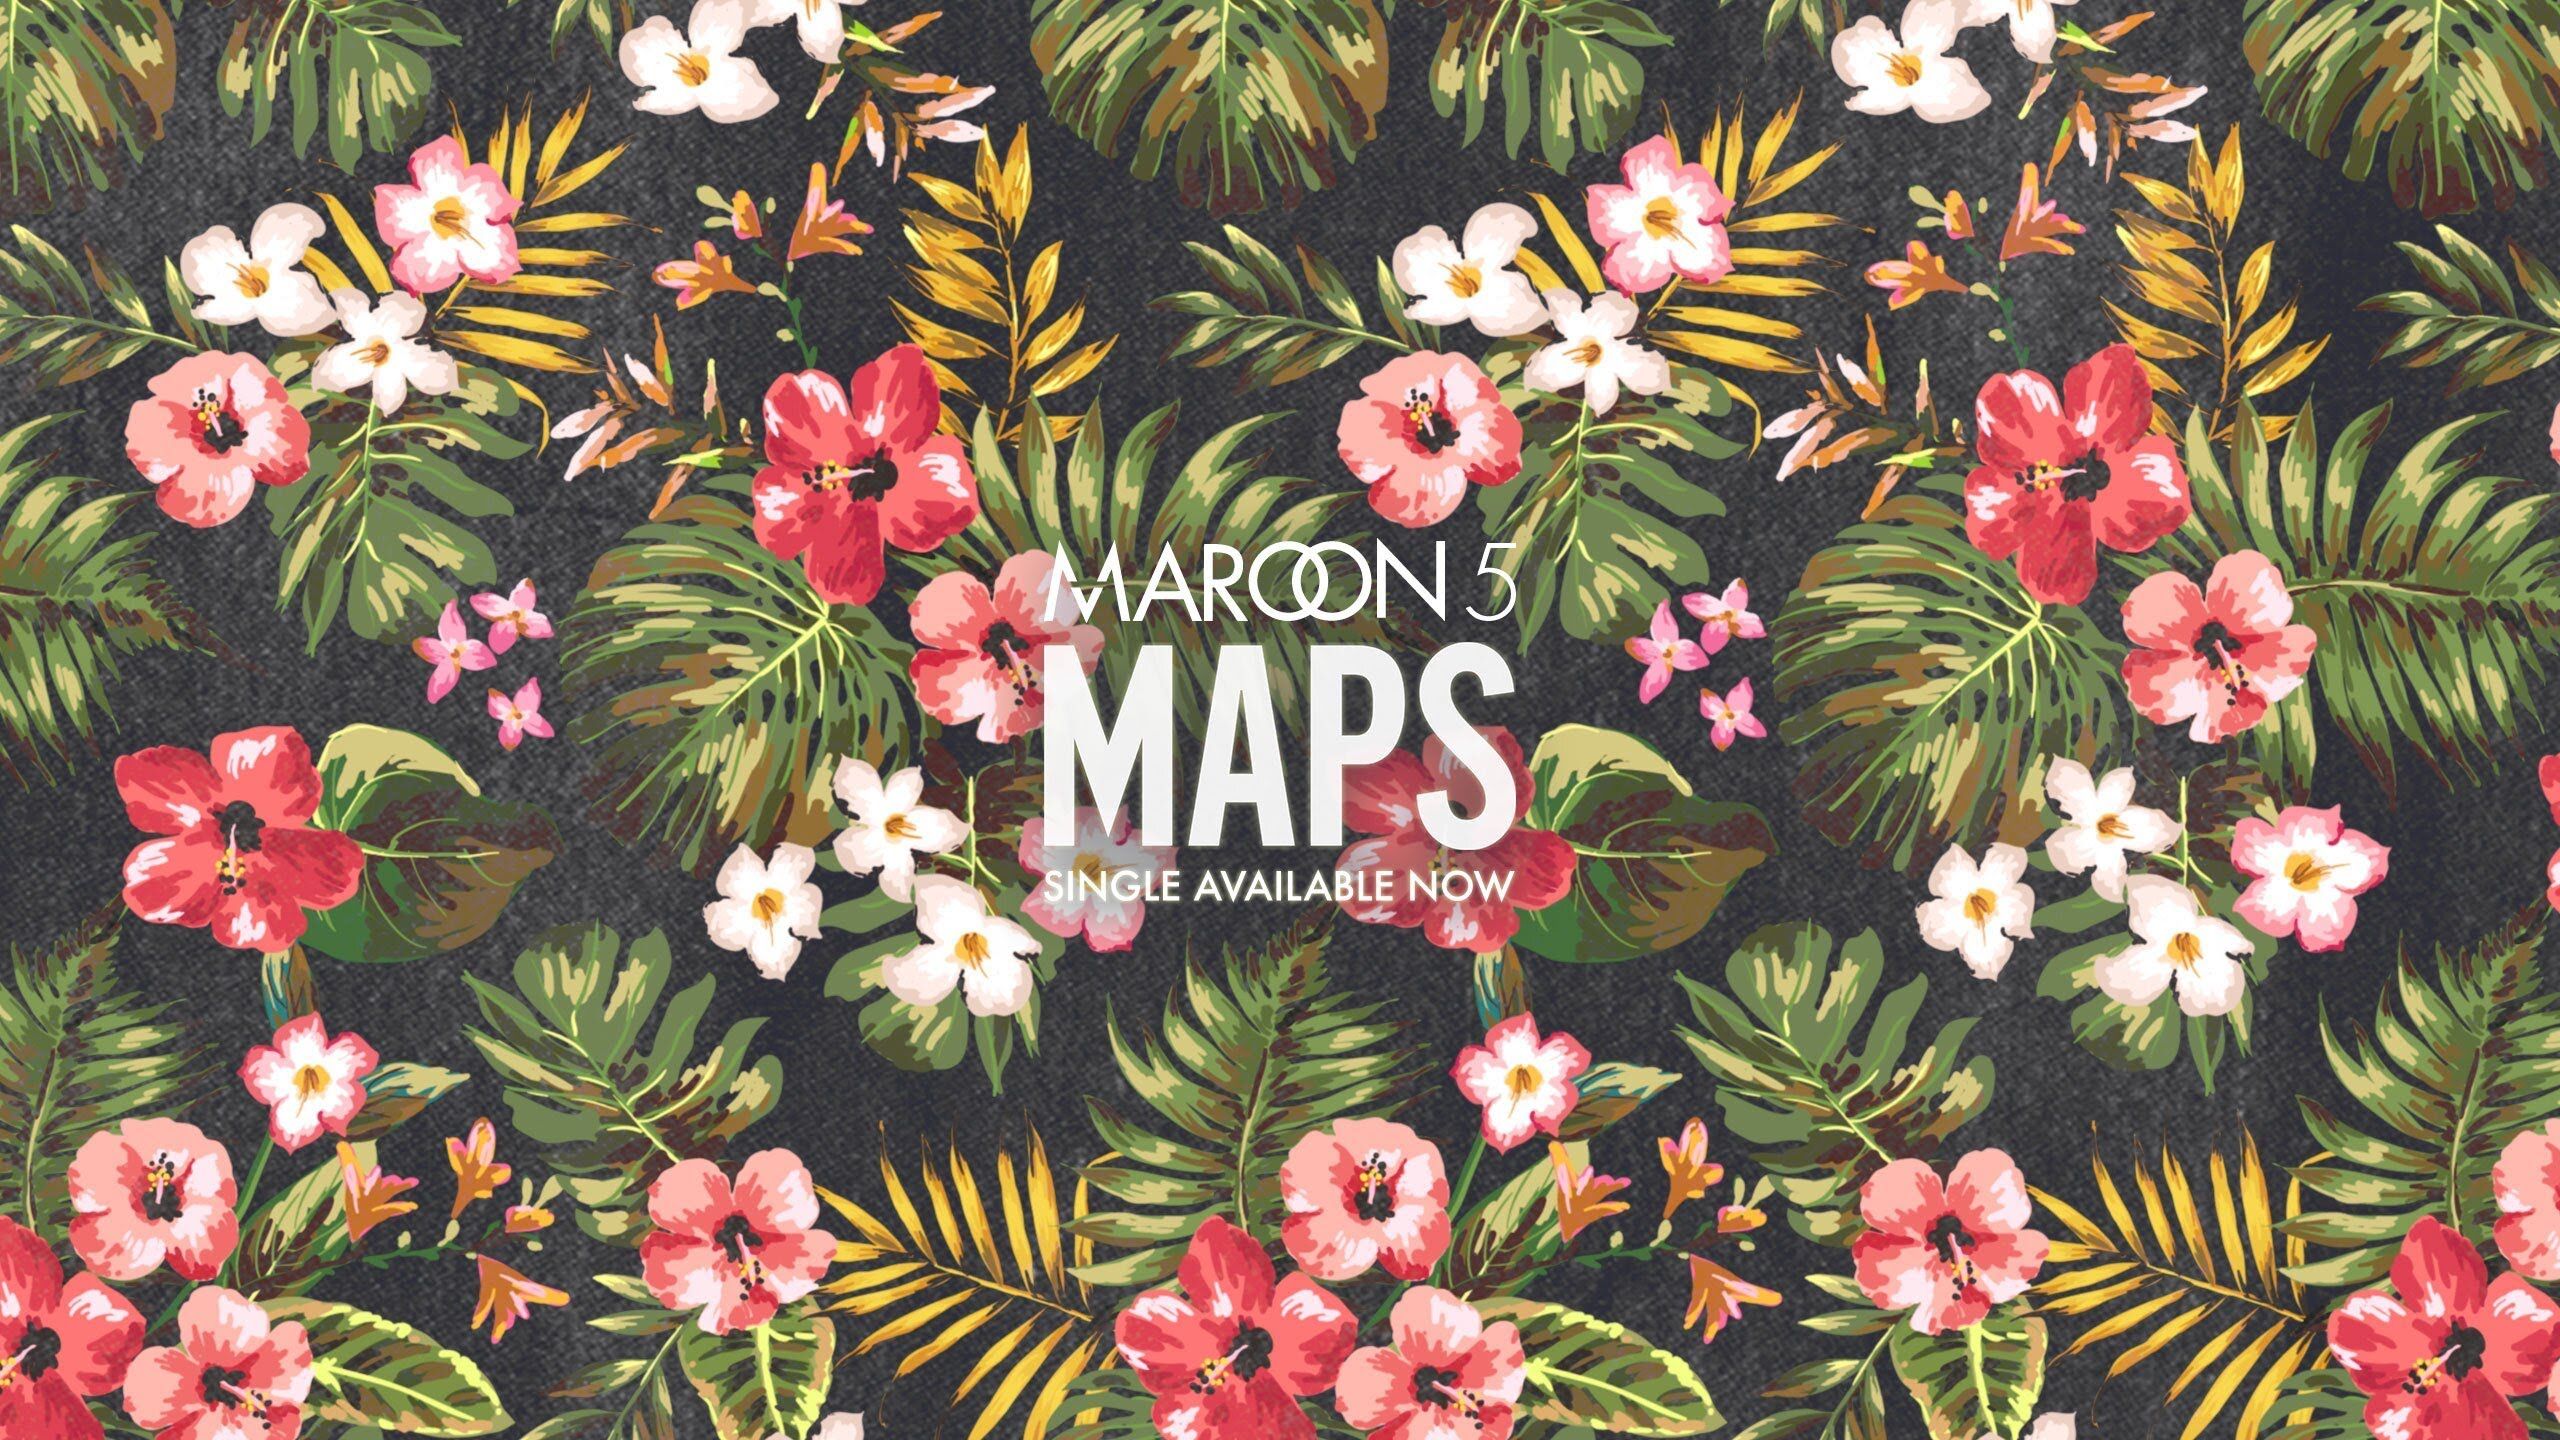 Free download Maroon 5 Maps New Single Available Wallpaper